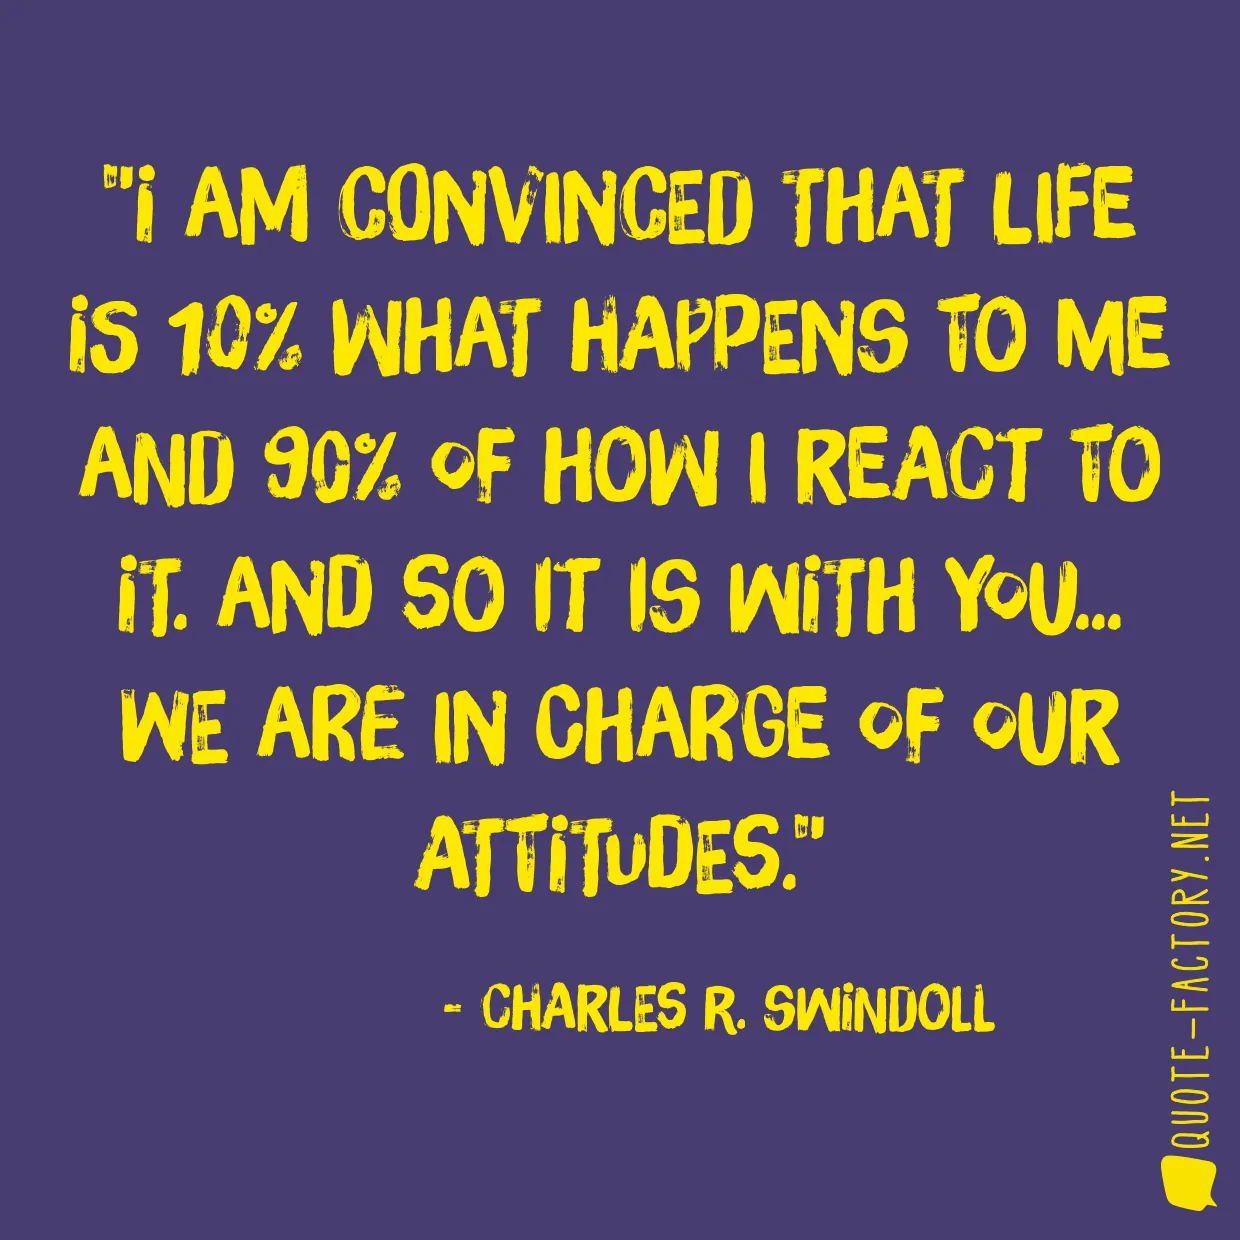 I am convinced that life is 10% what happens to me and 90% of how I react to it. And so it is with you... we are in charge of our Attitudes.